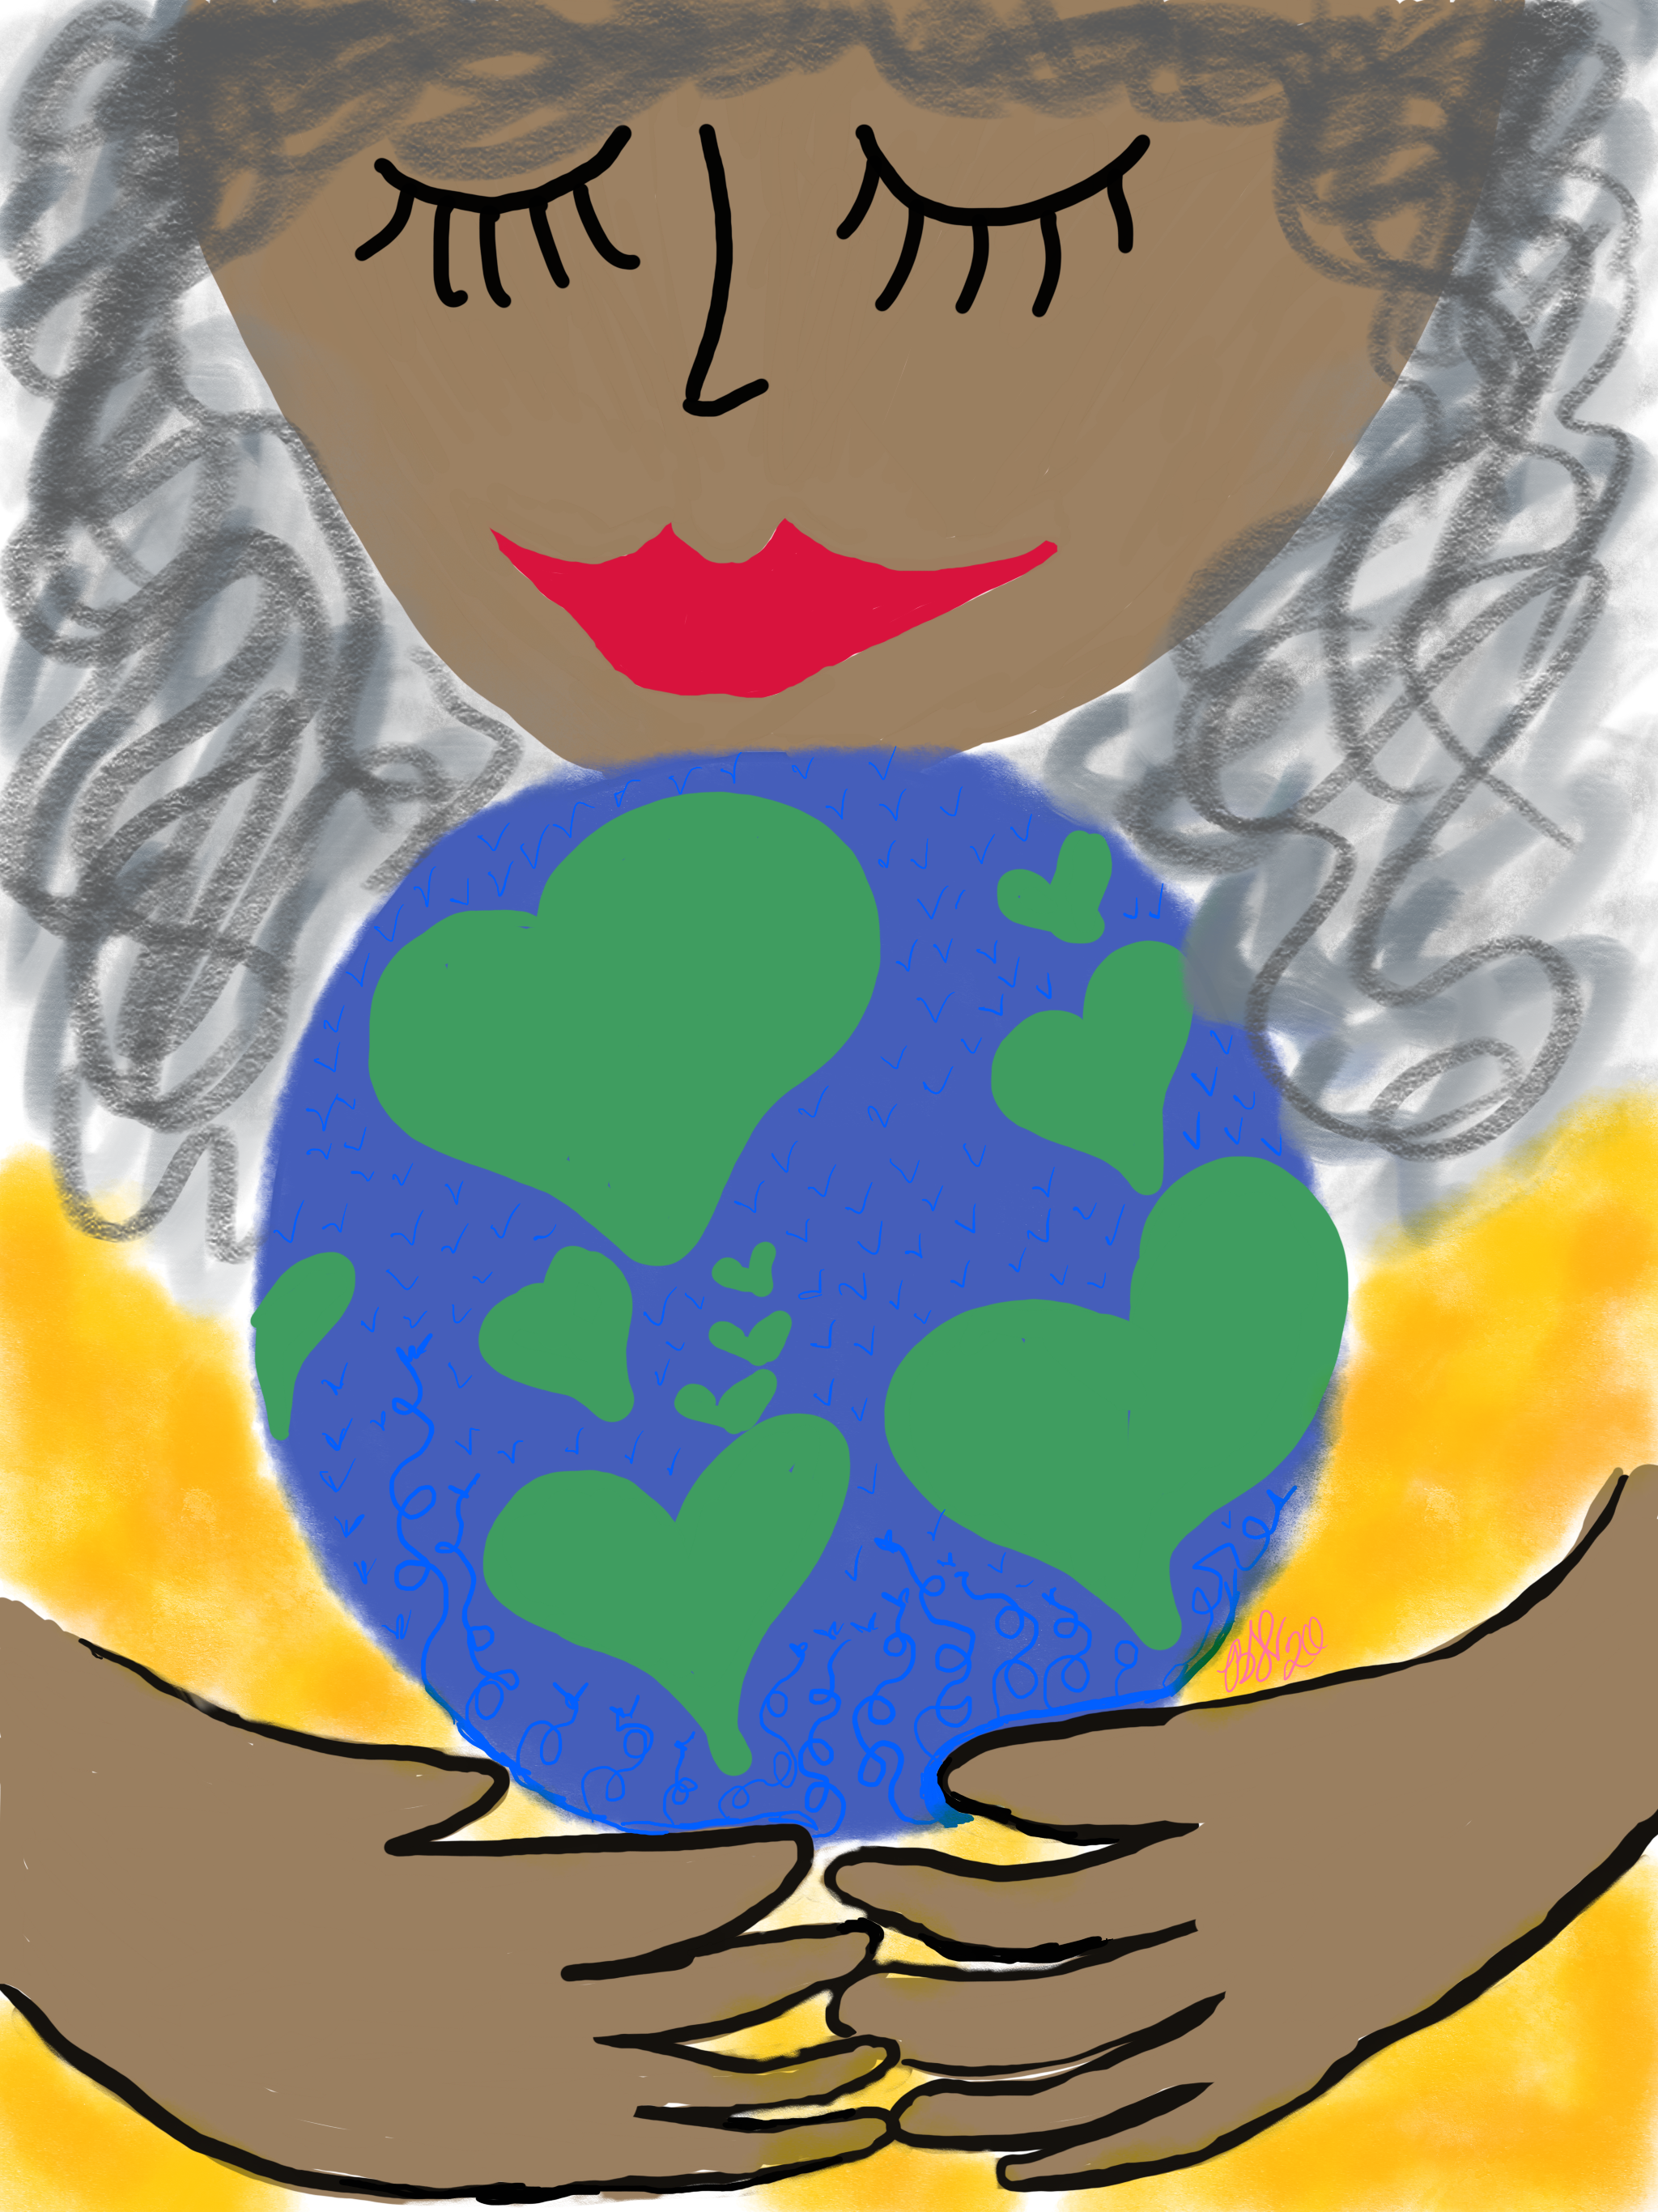 Gaia loves the world_Brooke Hoover.png